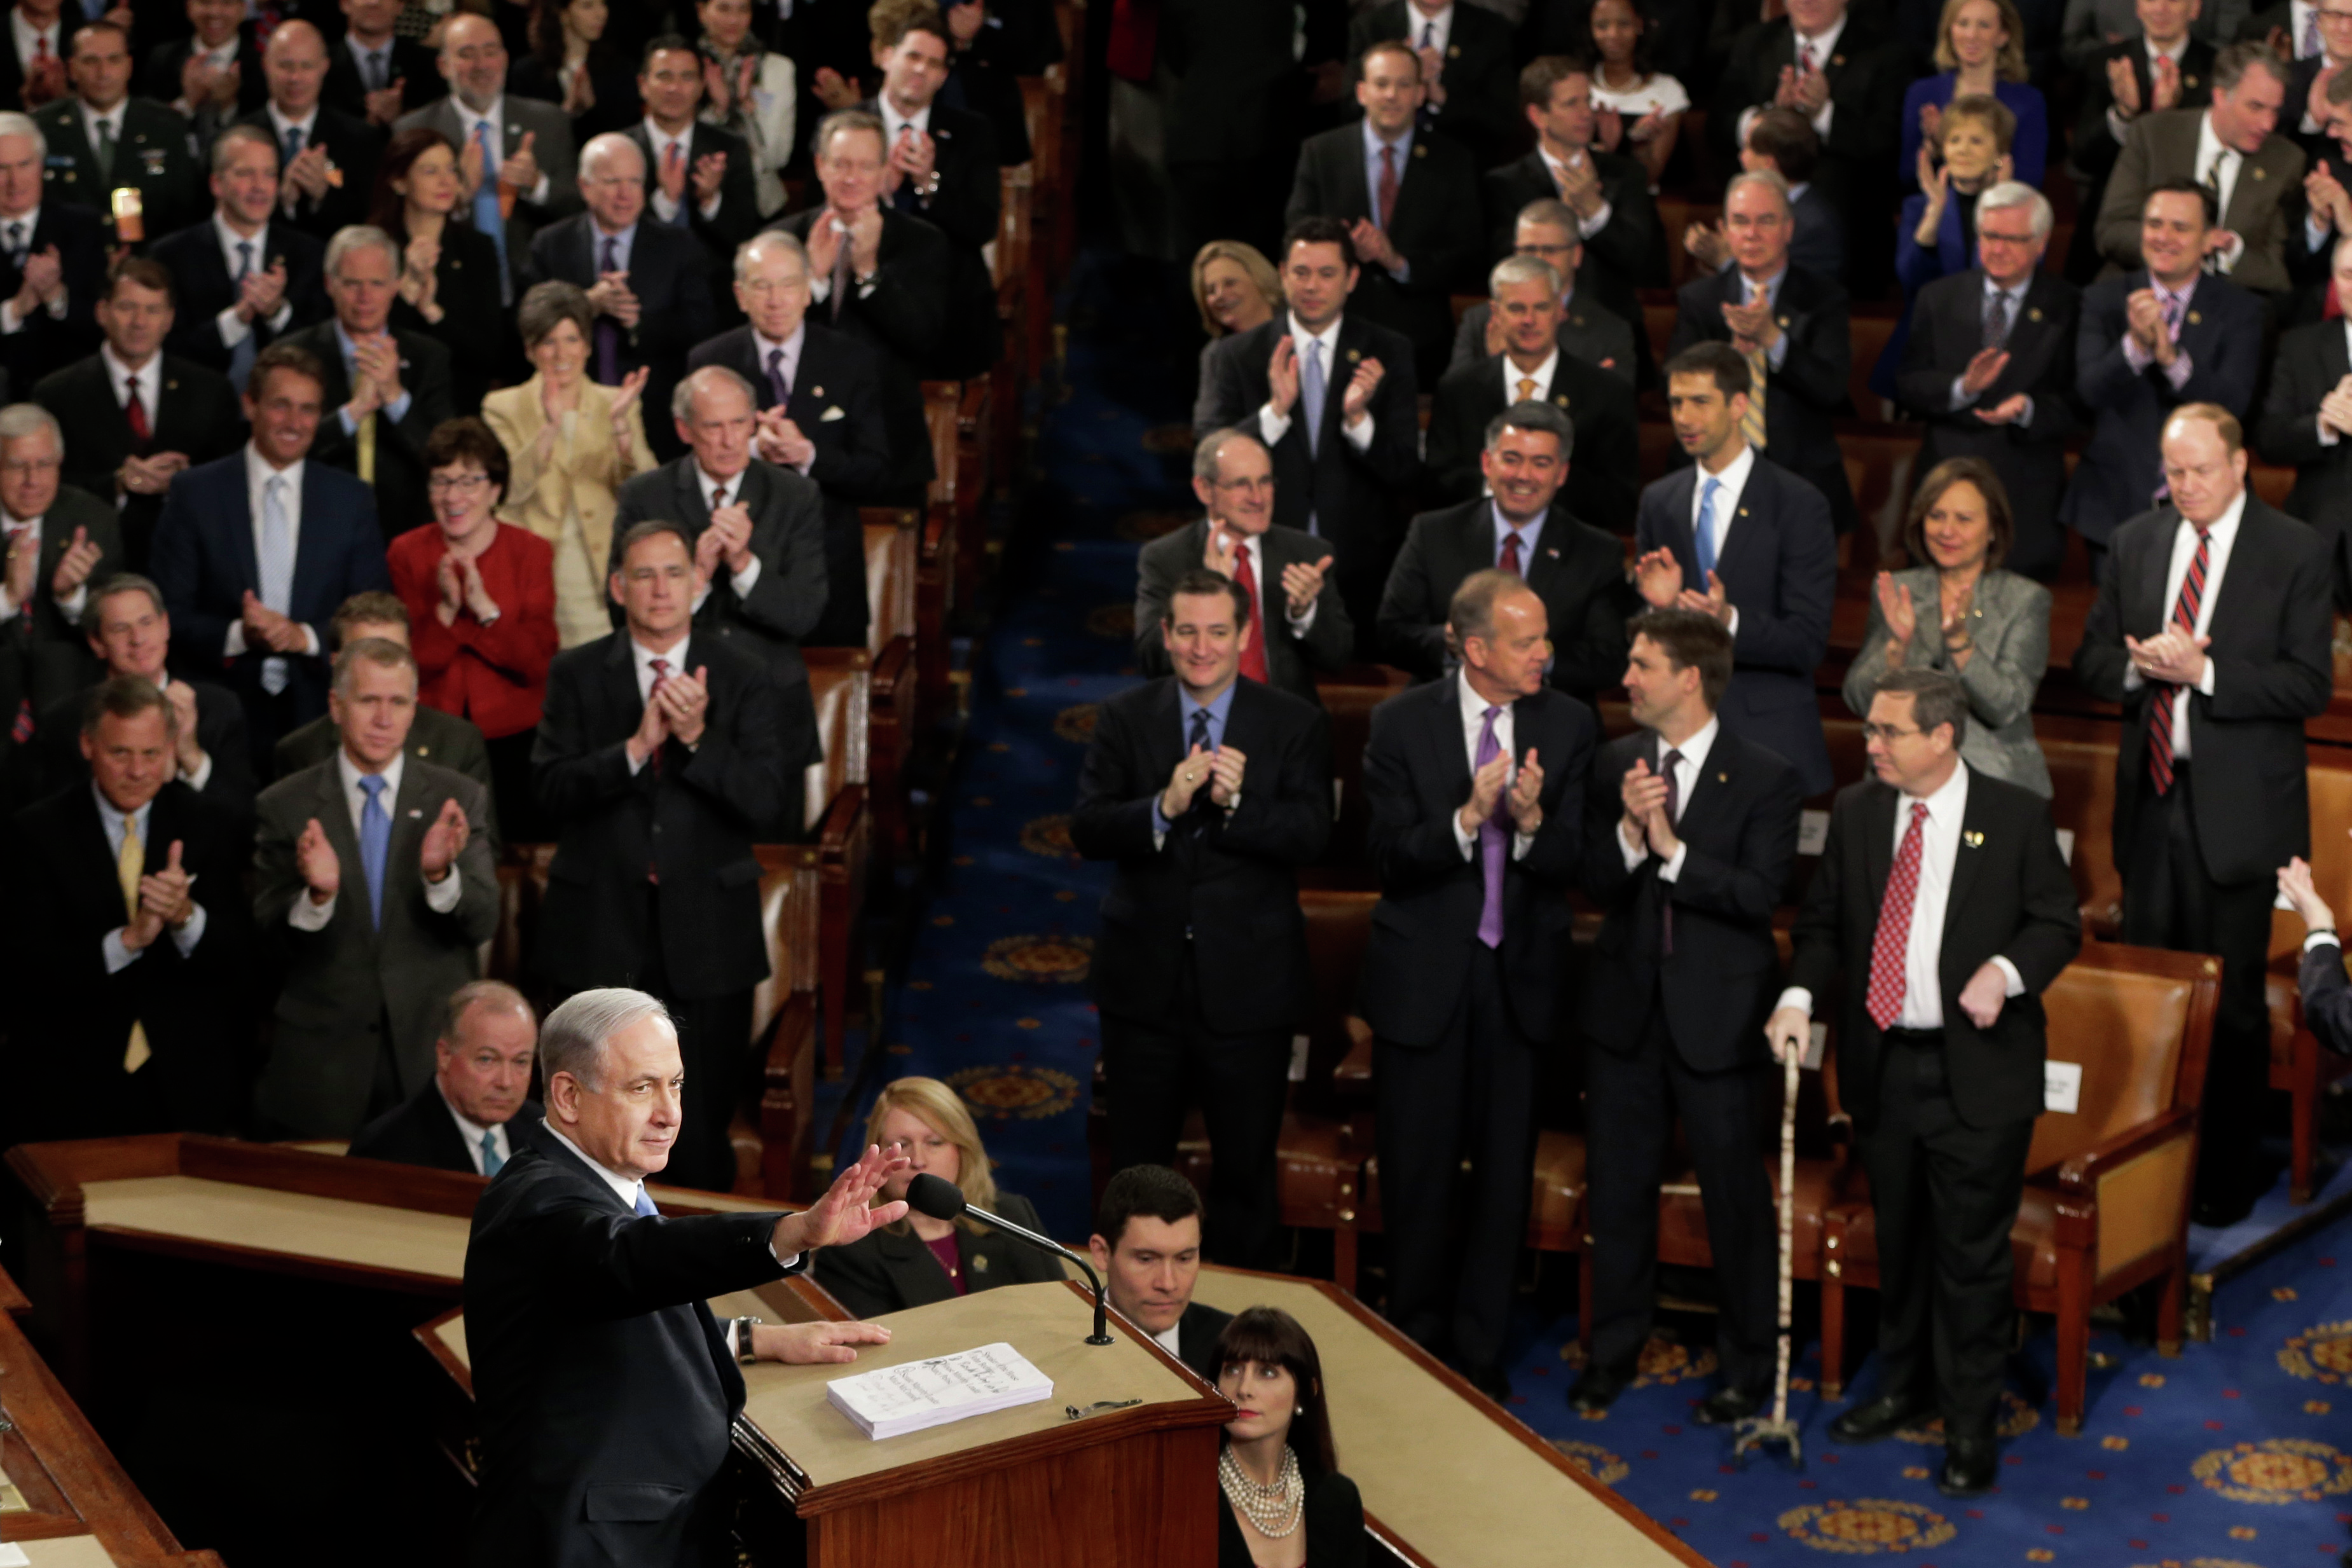 Day 231 - Netanyahu to 'soon' address Congress. What's his goal?